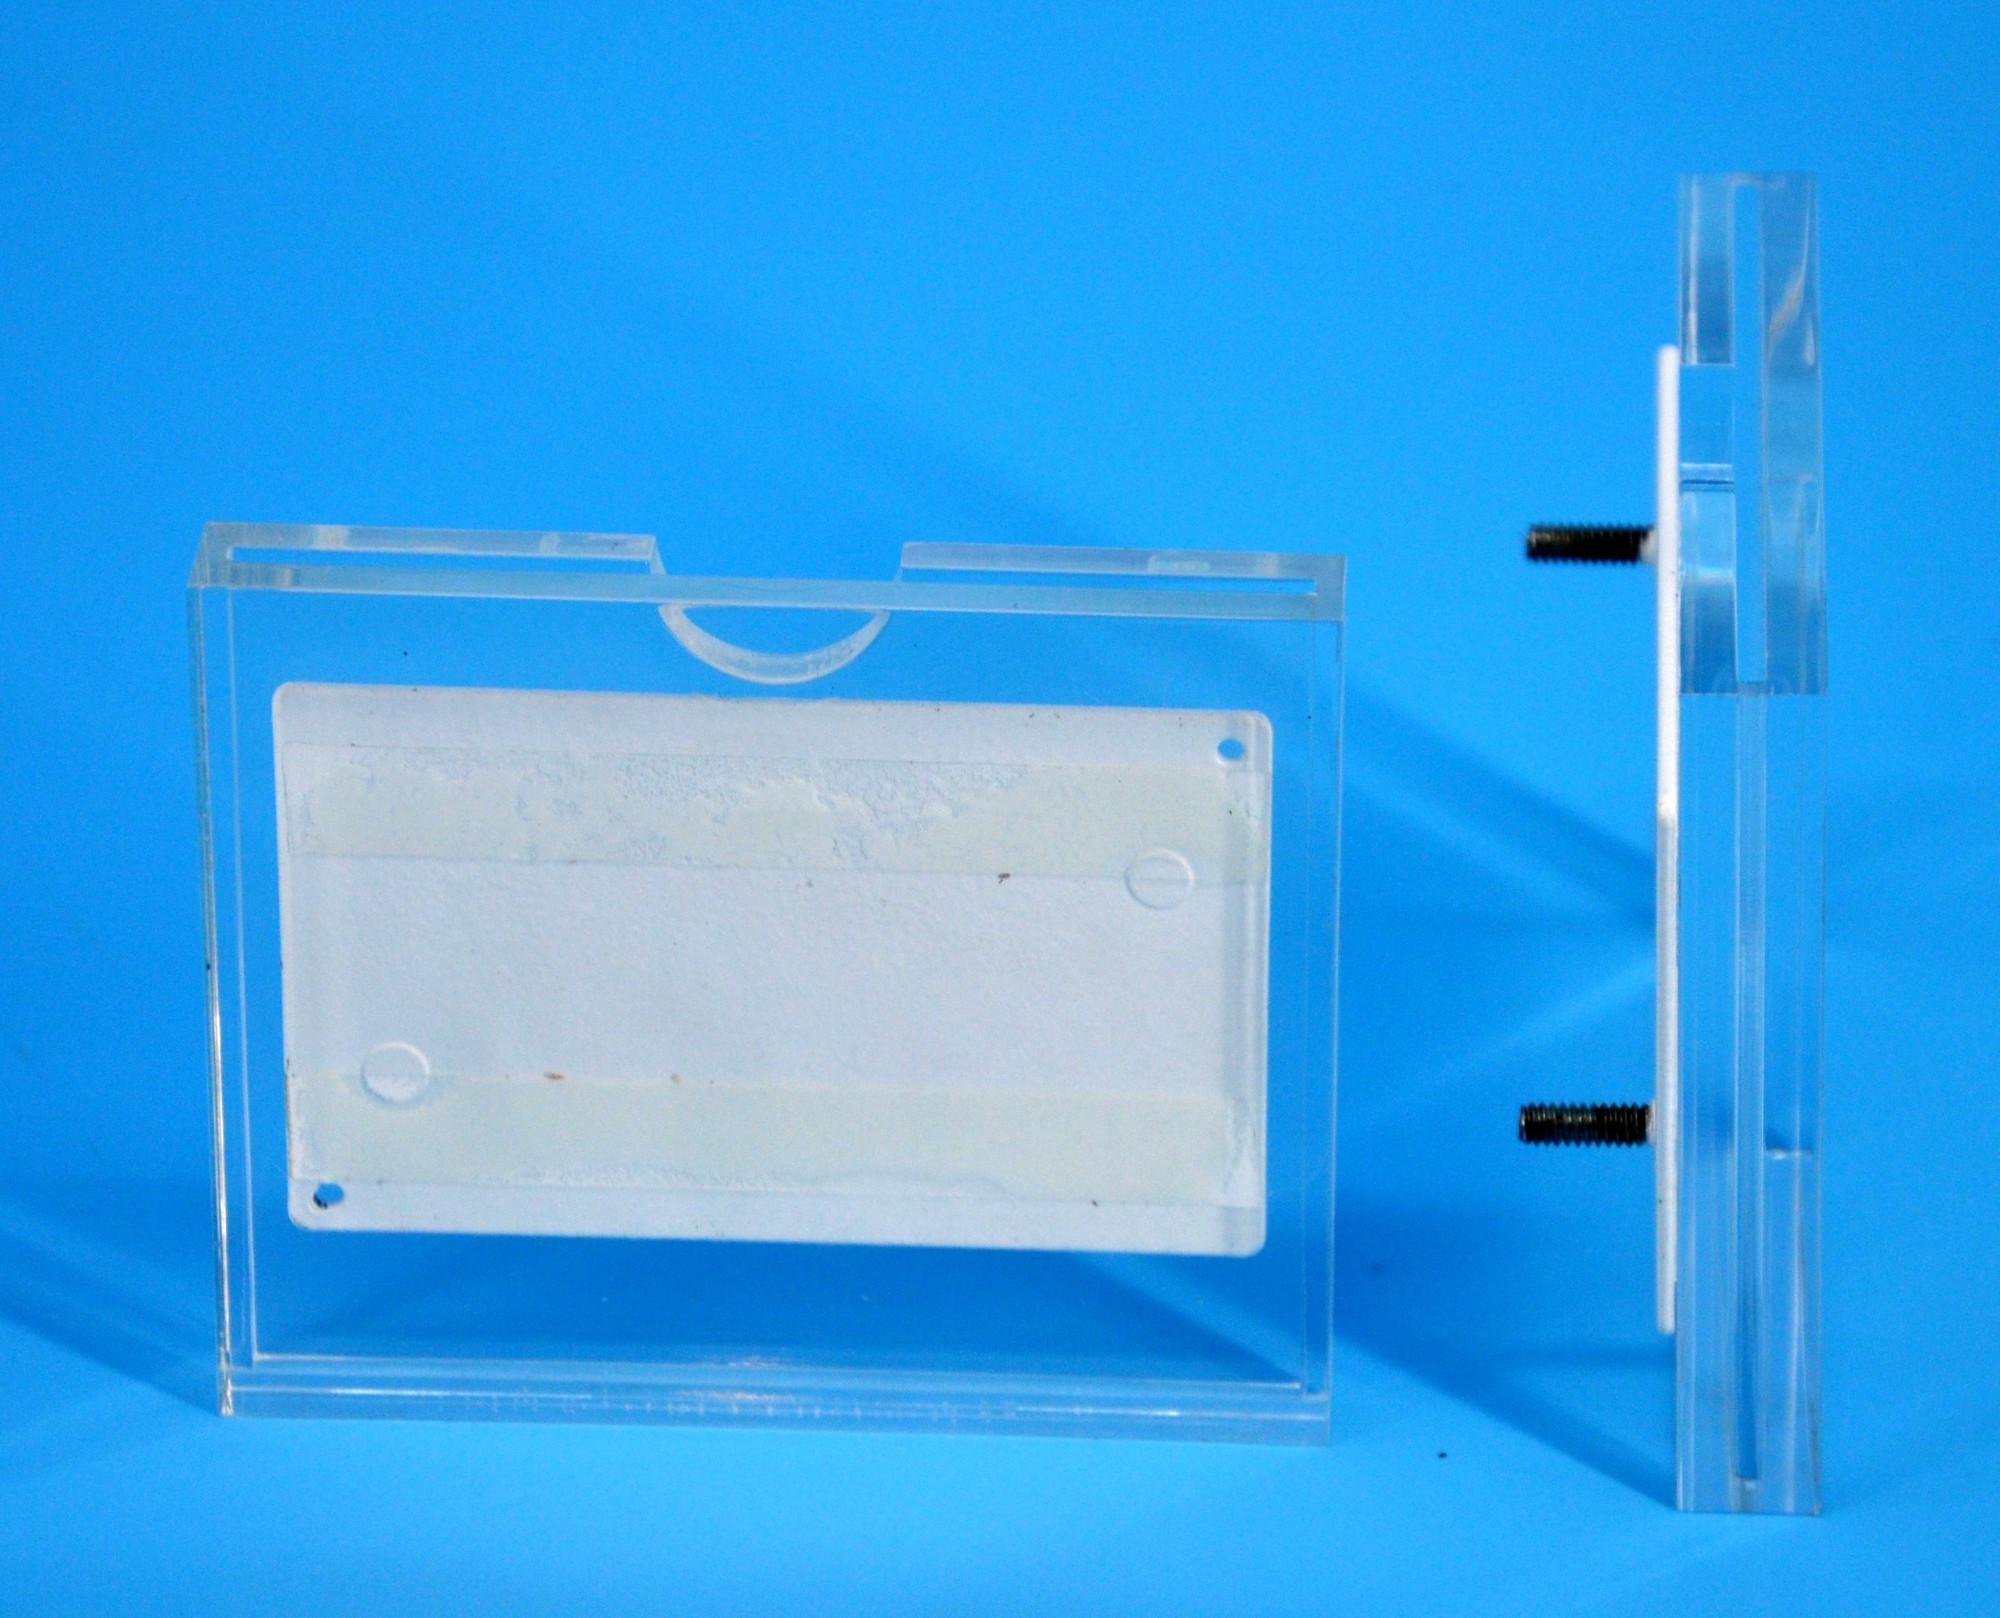 Acrylic Sign Holders Manufacturers, Acrylic Sign Holders Factory, Supply Acrylic Sign Holders